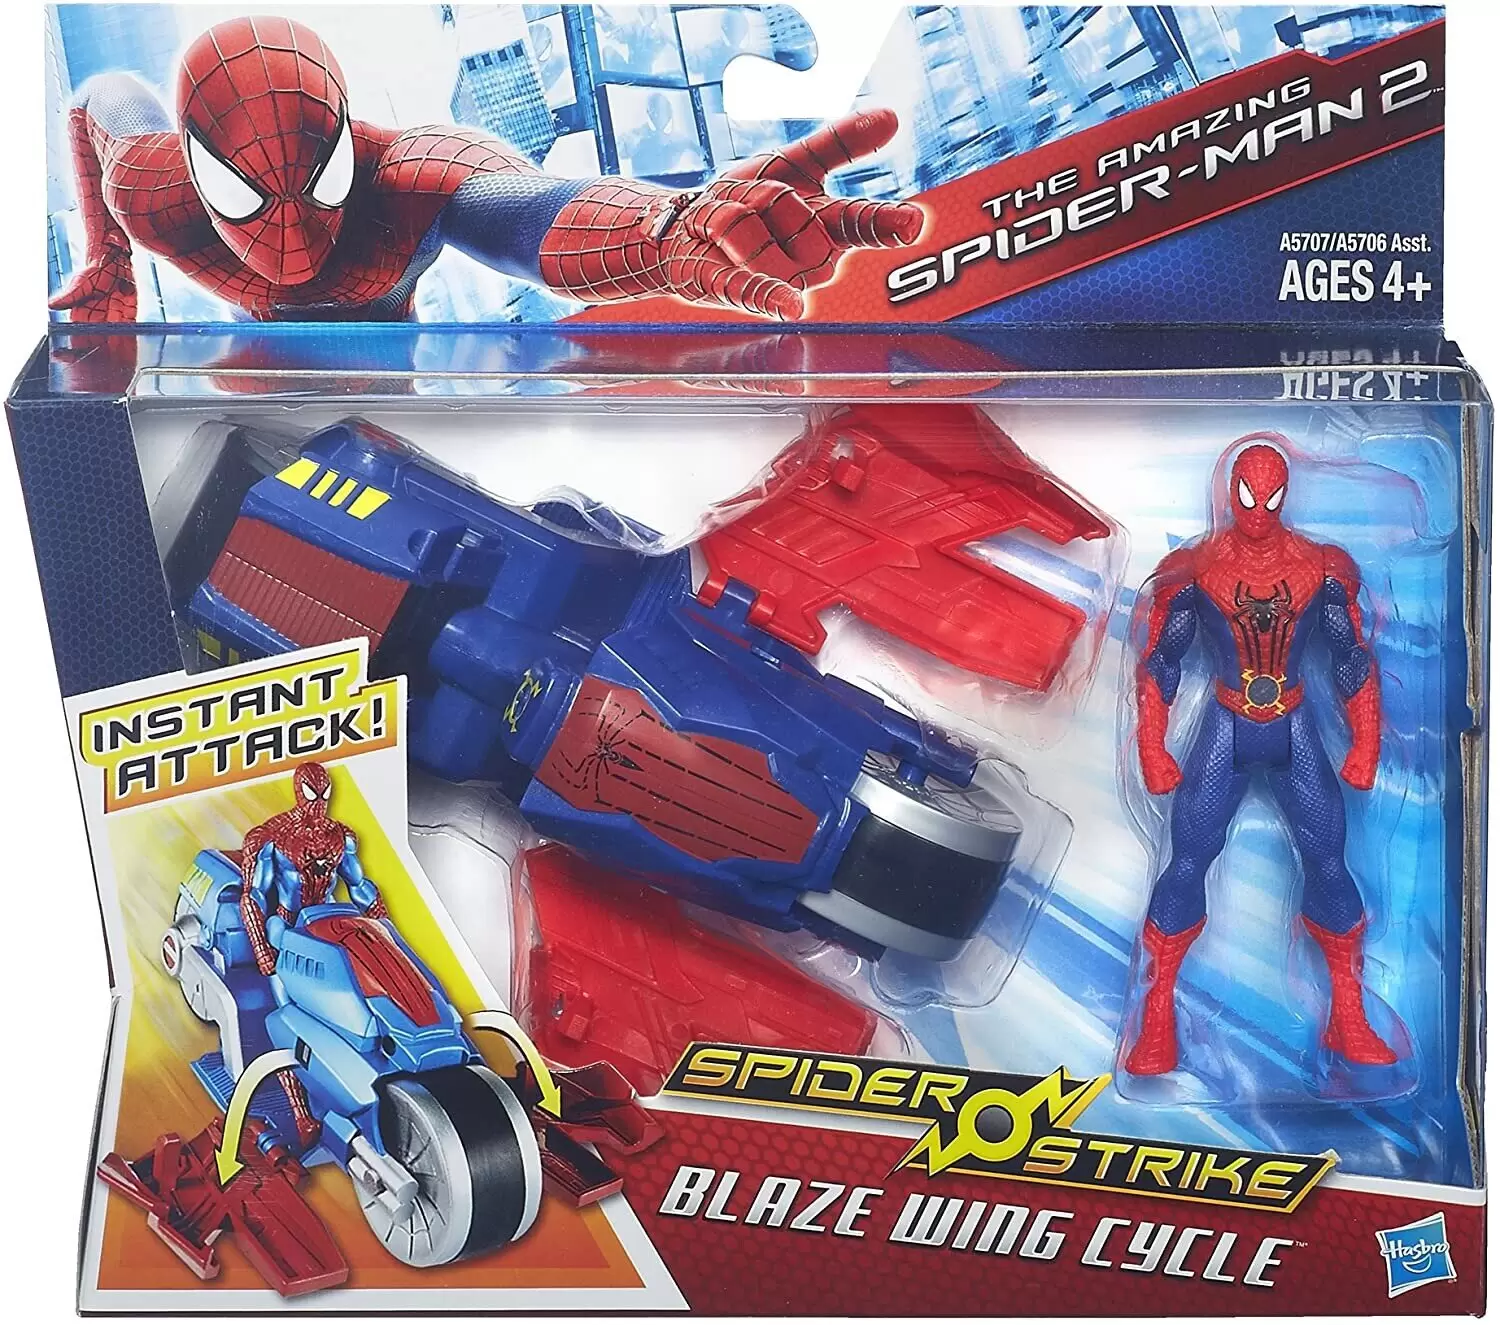 The Amazing Spider-Man 2 - Blaze Wing Cycle